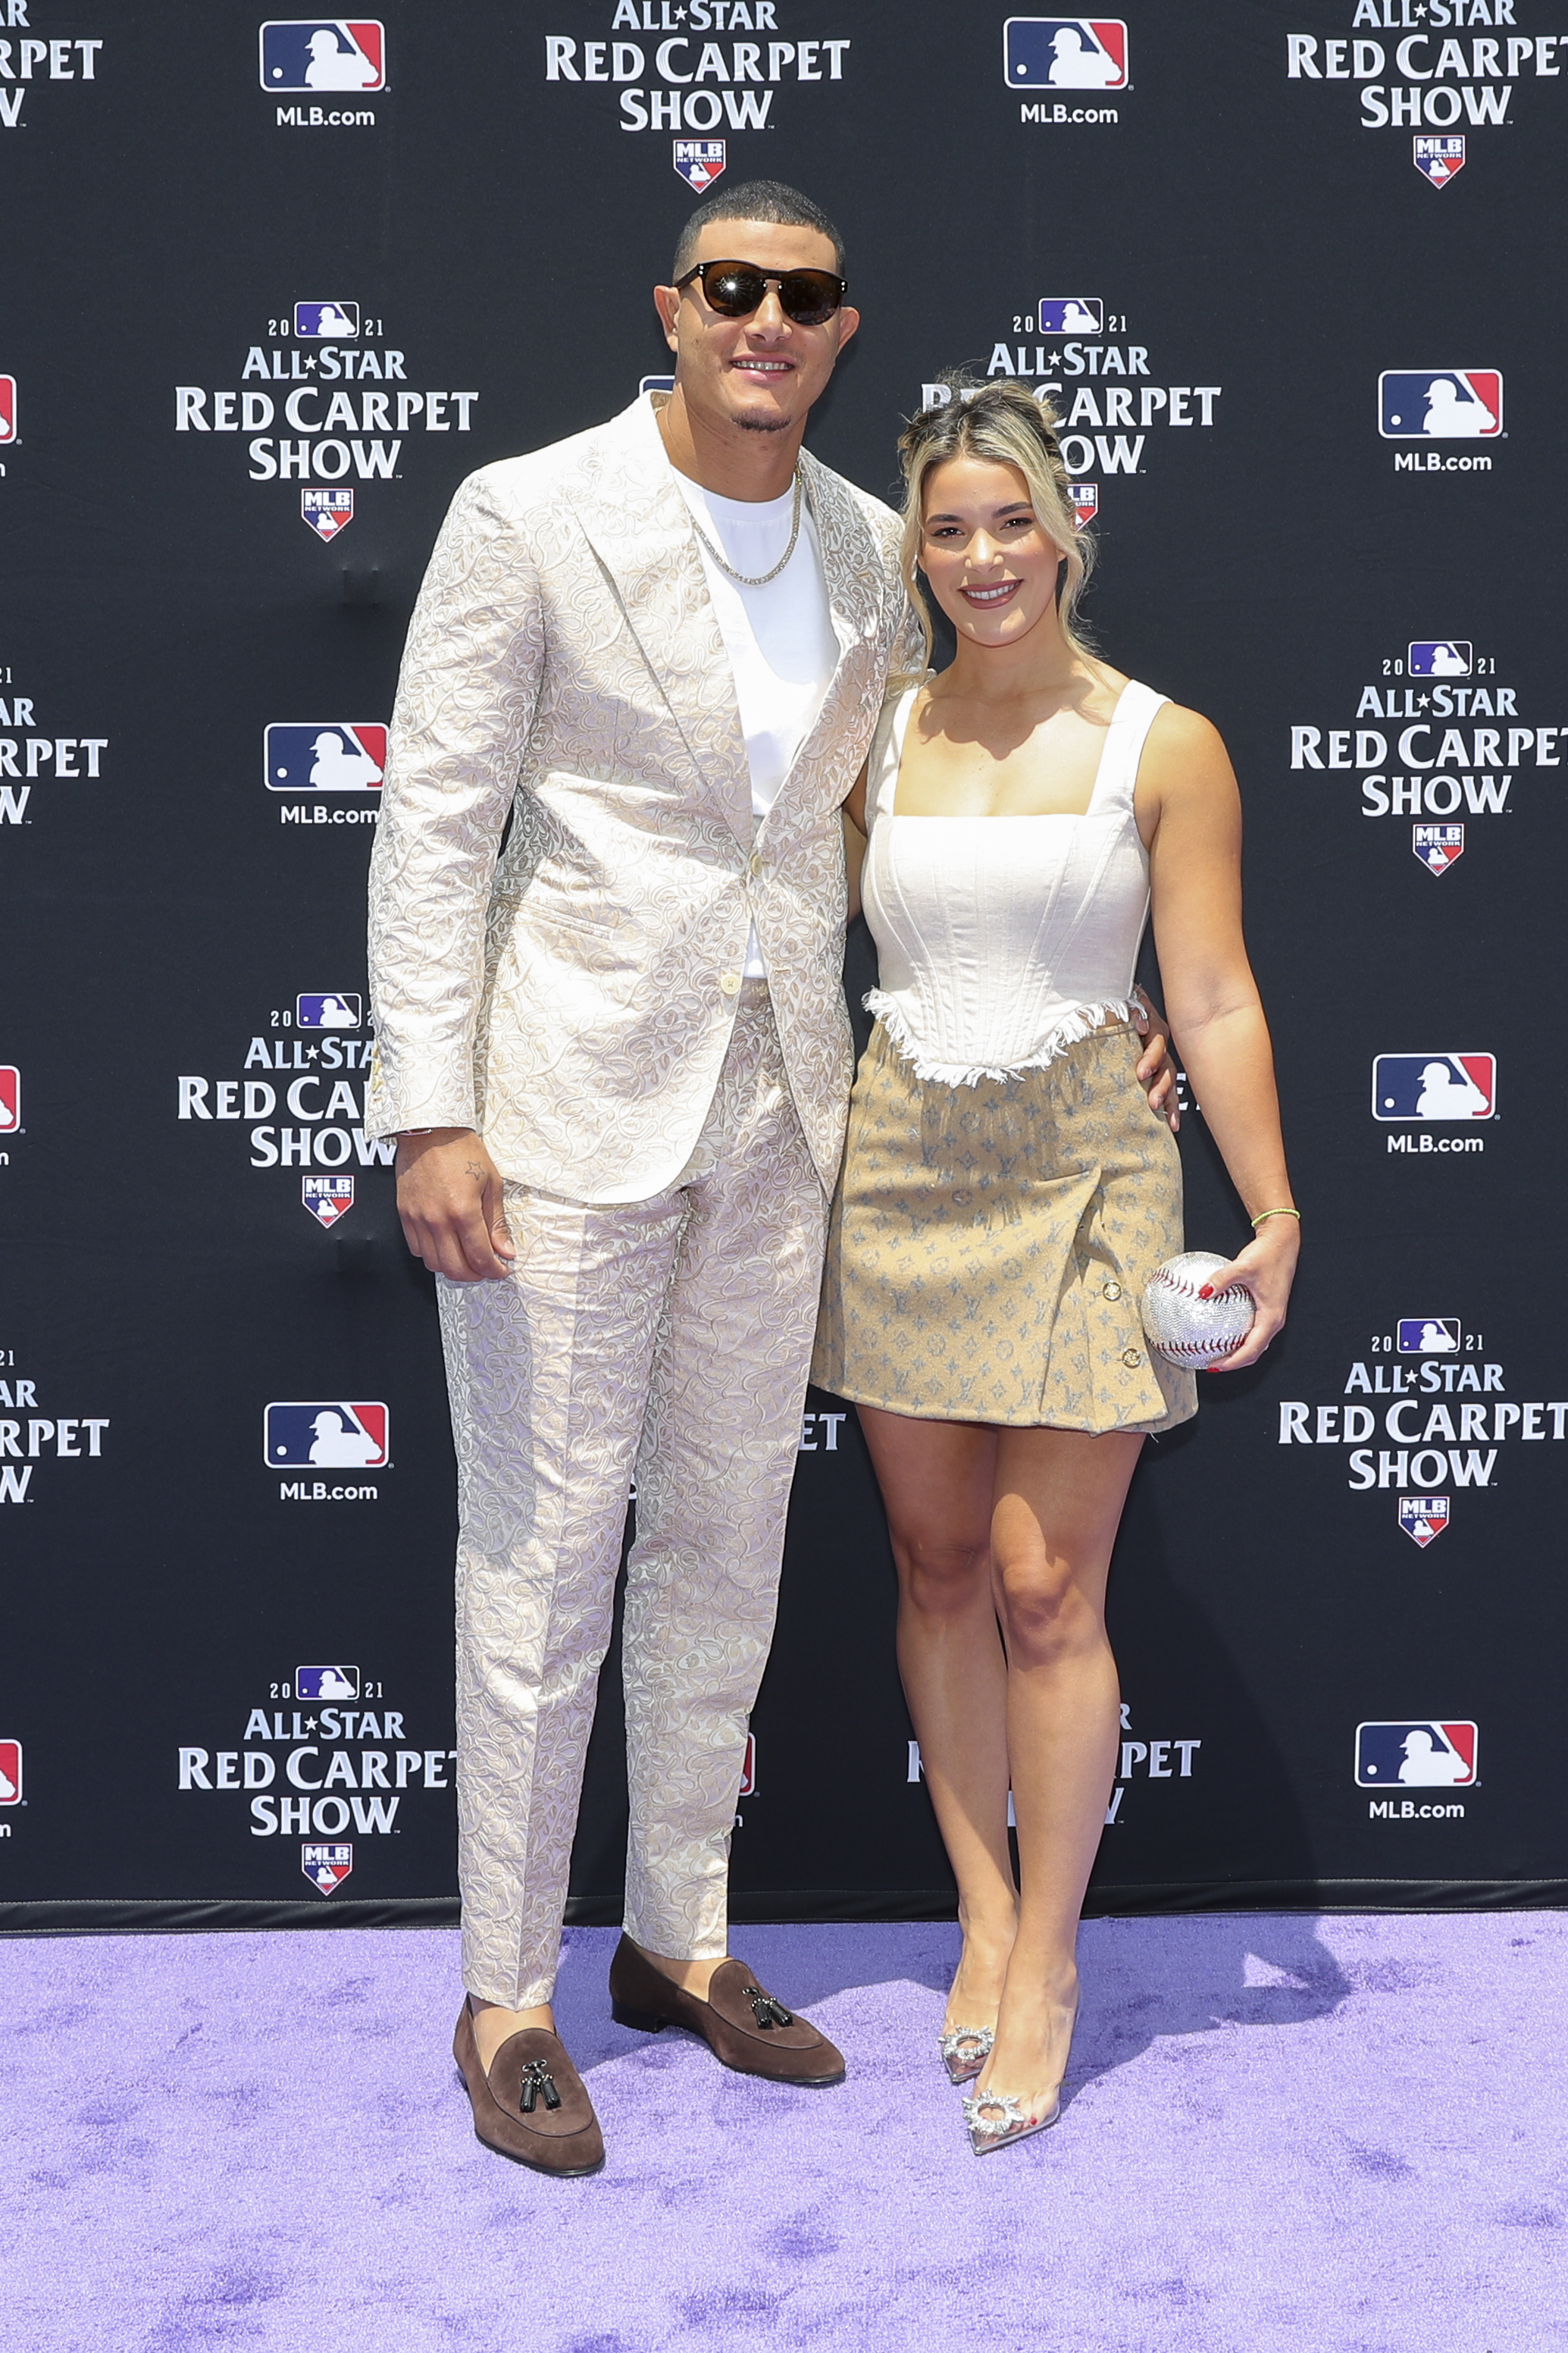 Manny Machado and Yainee Alonso at the MLB All-Star Red Carpet Show at Downtown Colorado on Tuesday, July 13, 2021, in Denver, Colorado. | Source: Getty Images